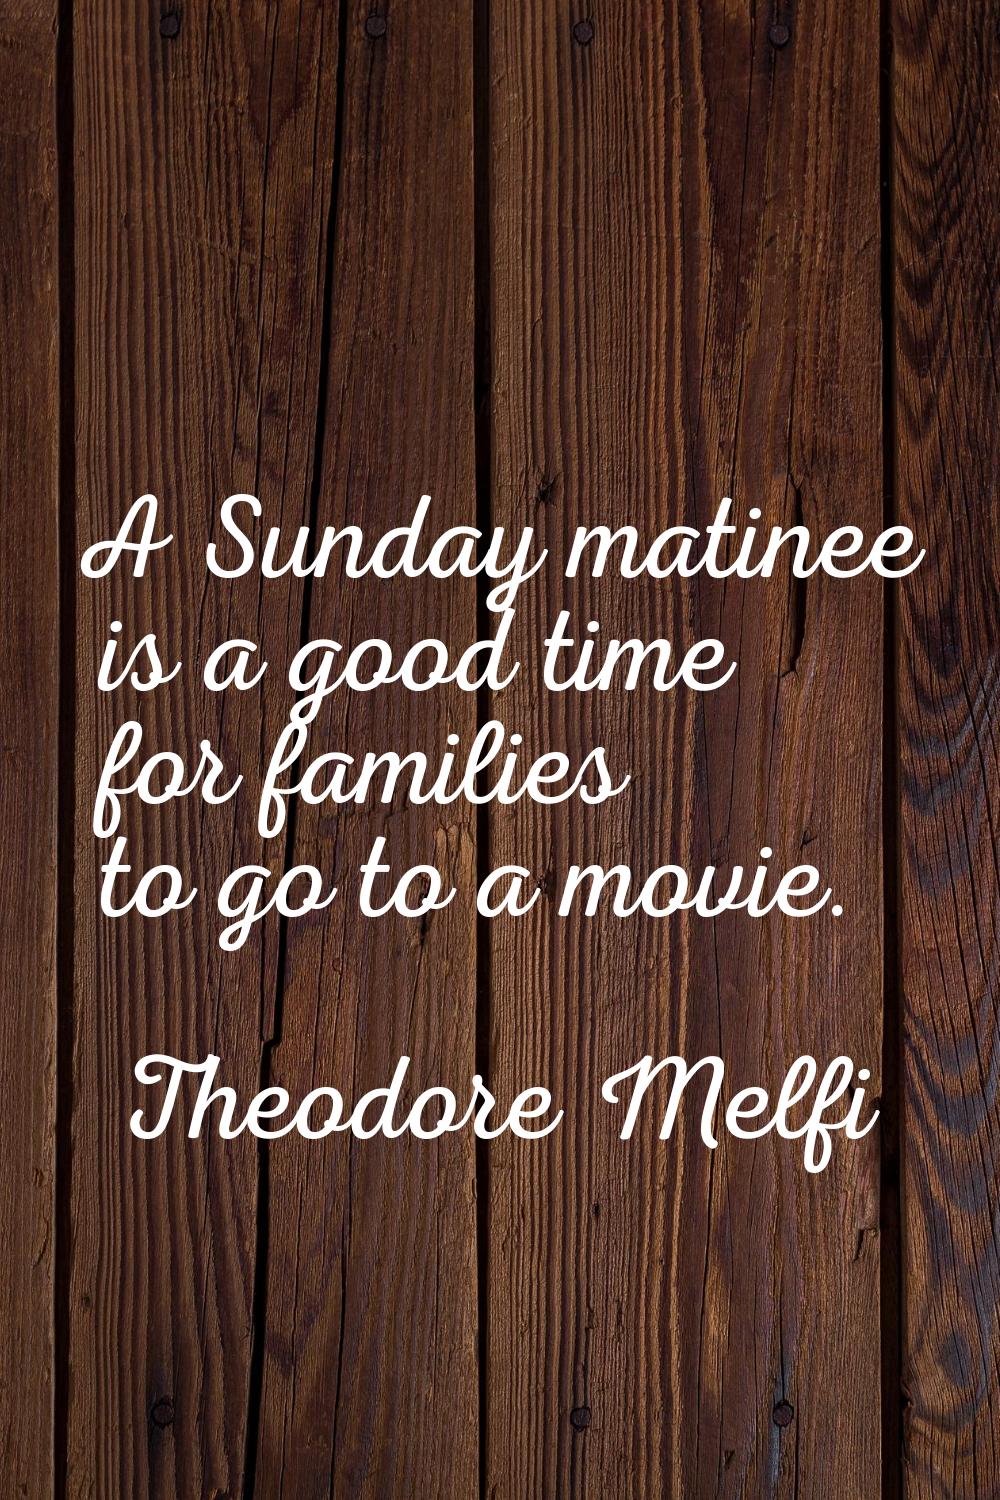 A Sunday matinee is a good time for families to go to a movie.